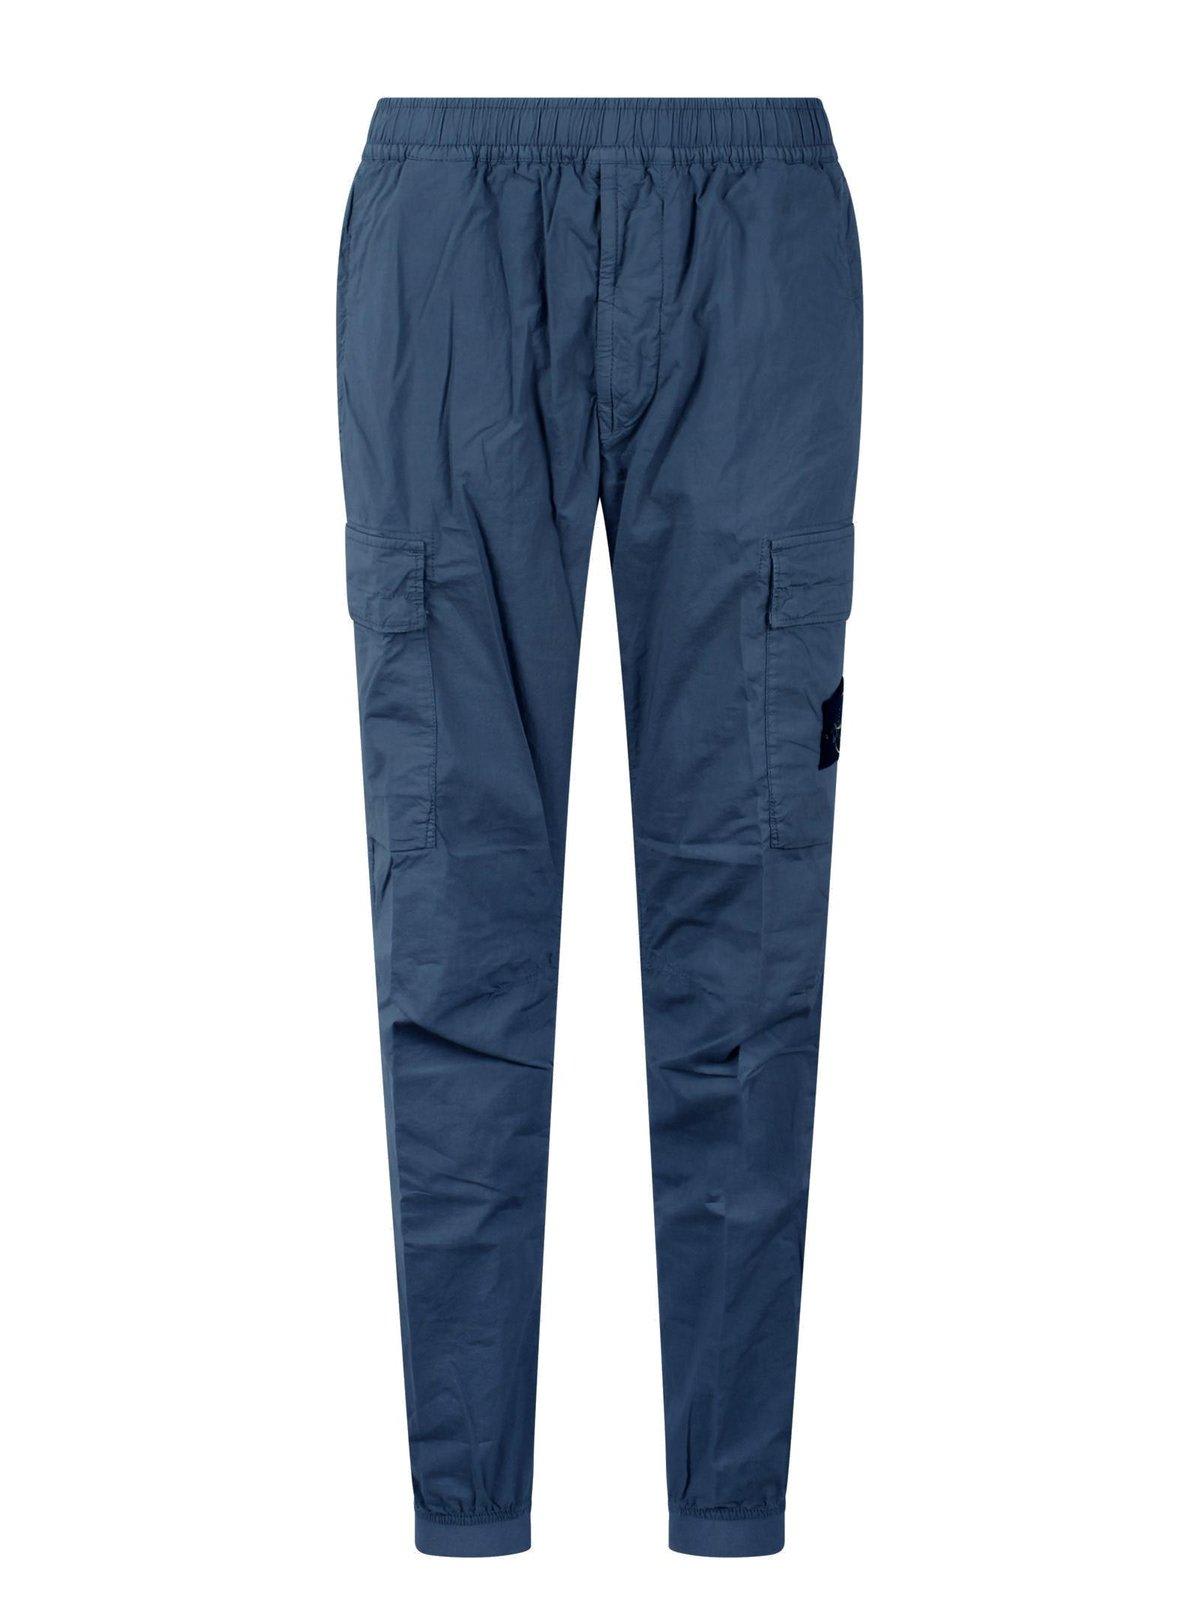 STONE ISLAND COMPASS PATCH ELASTICATED WAIST CARGO TROUSERS